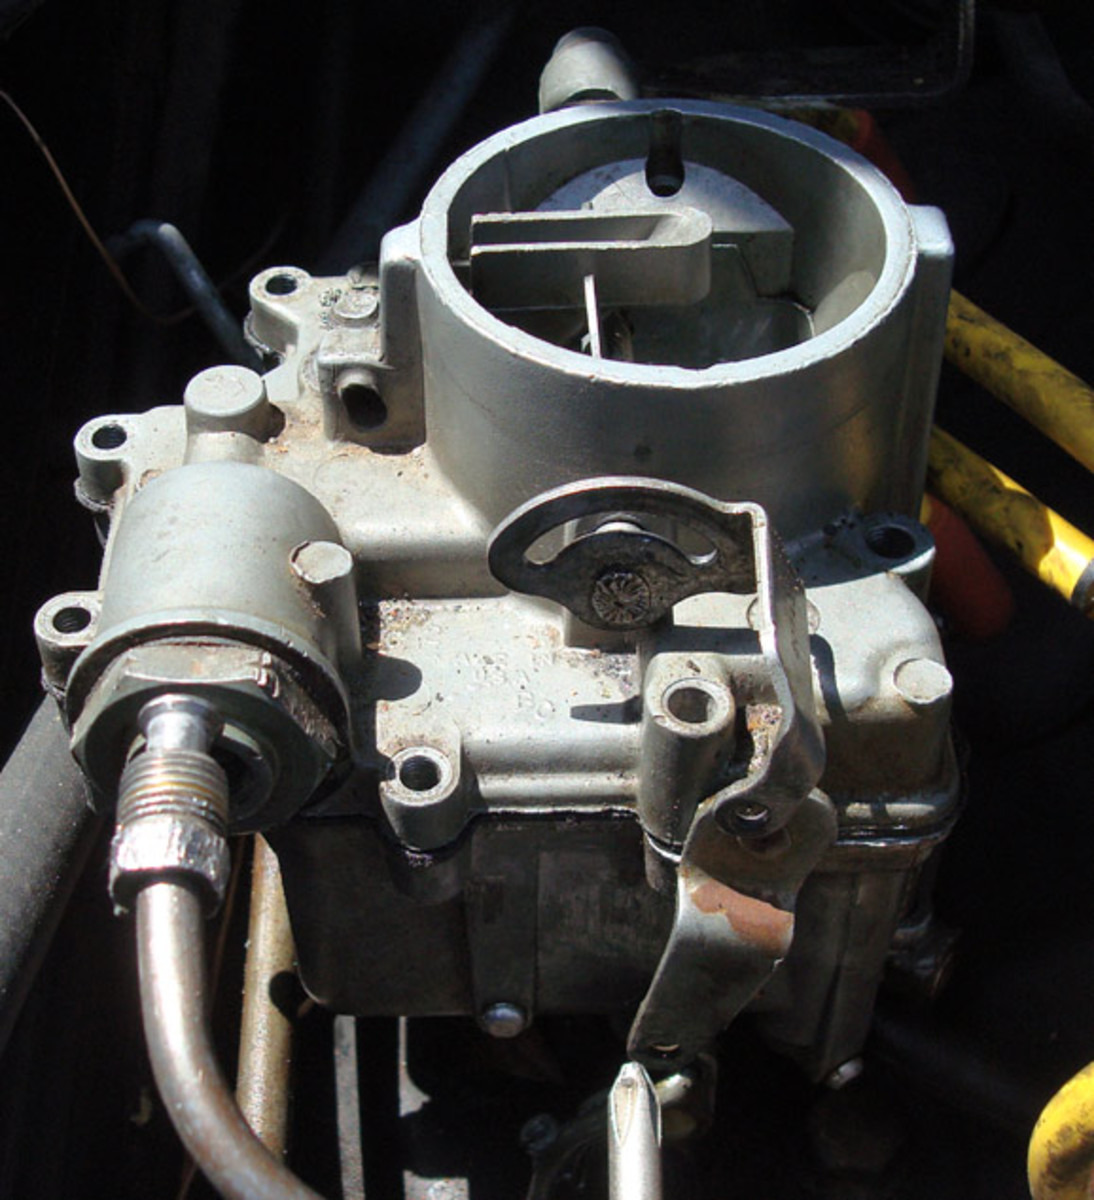 Once cleaned, reinstall the cluster back into the carb as you found it